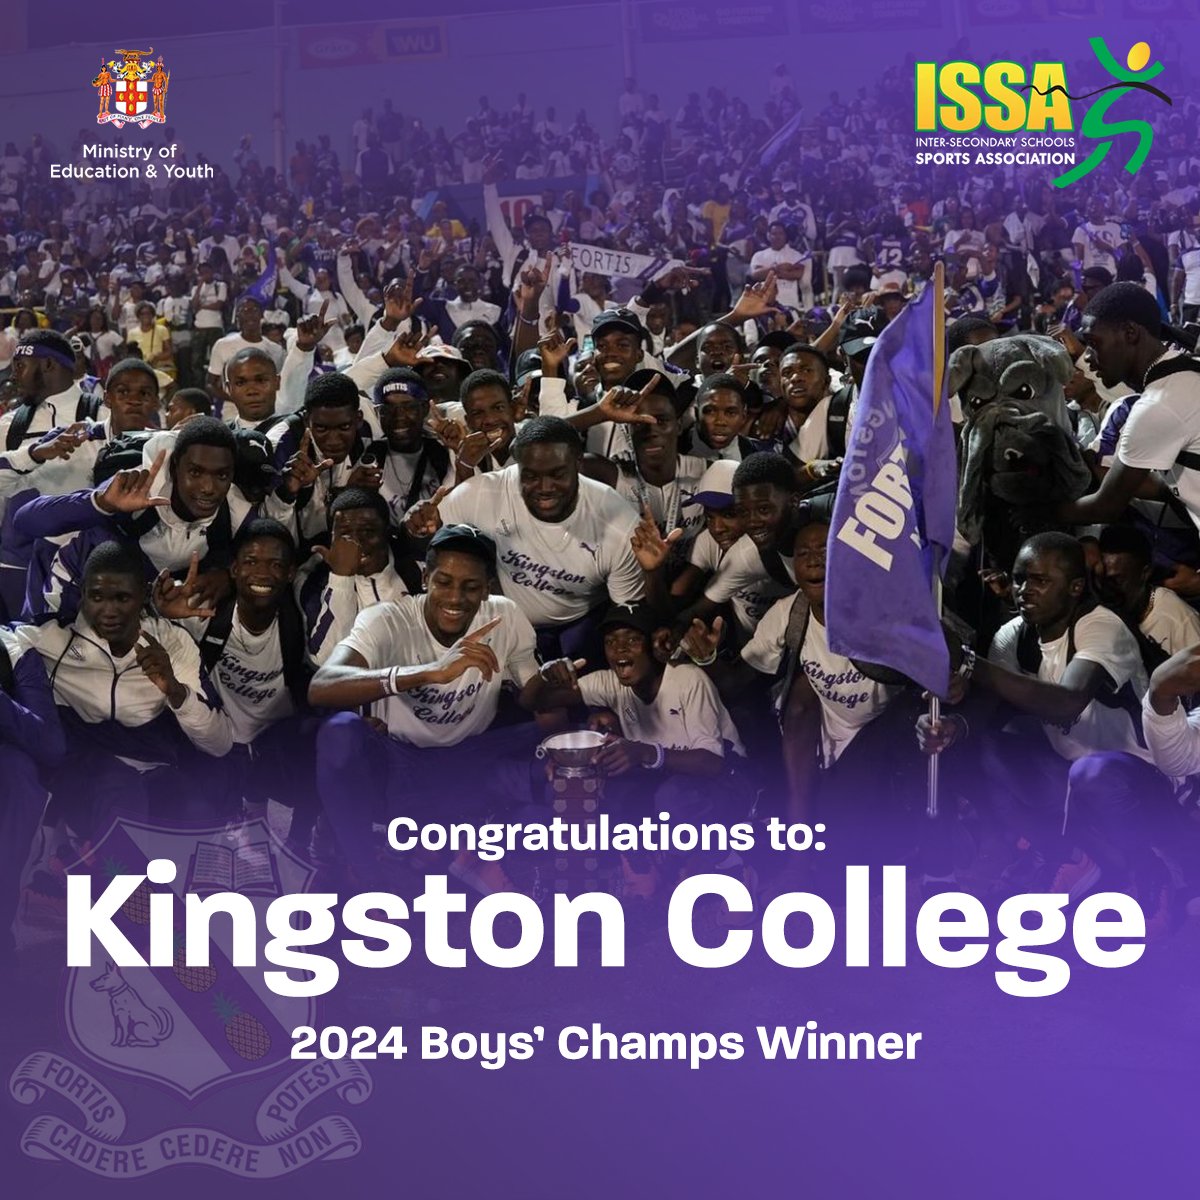 Kingston College emerges triumphant as champions of the 2024 ISSA/Grace Kennedy Boys' Championship. Congratulations on this remarkable achievement.